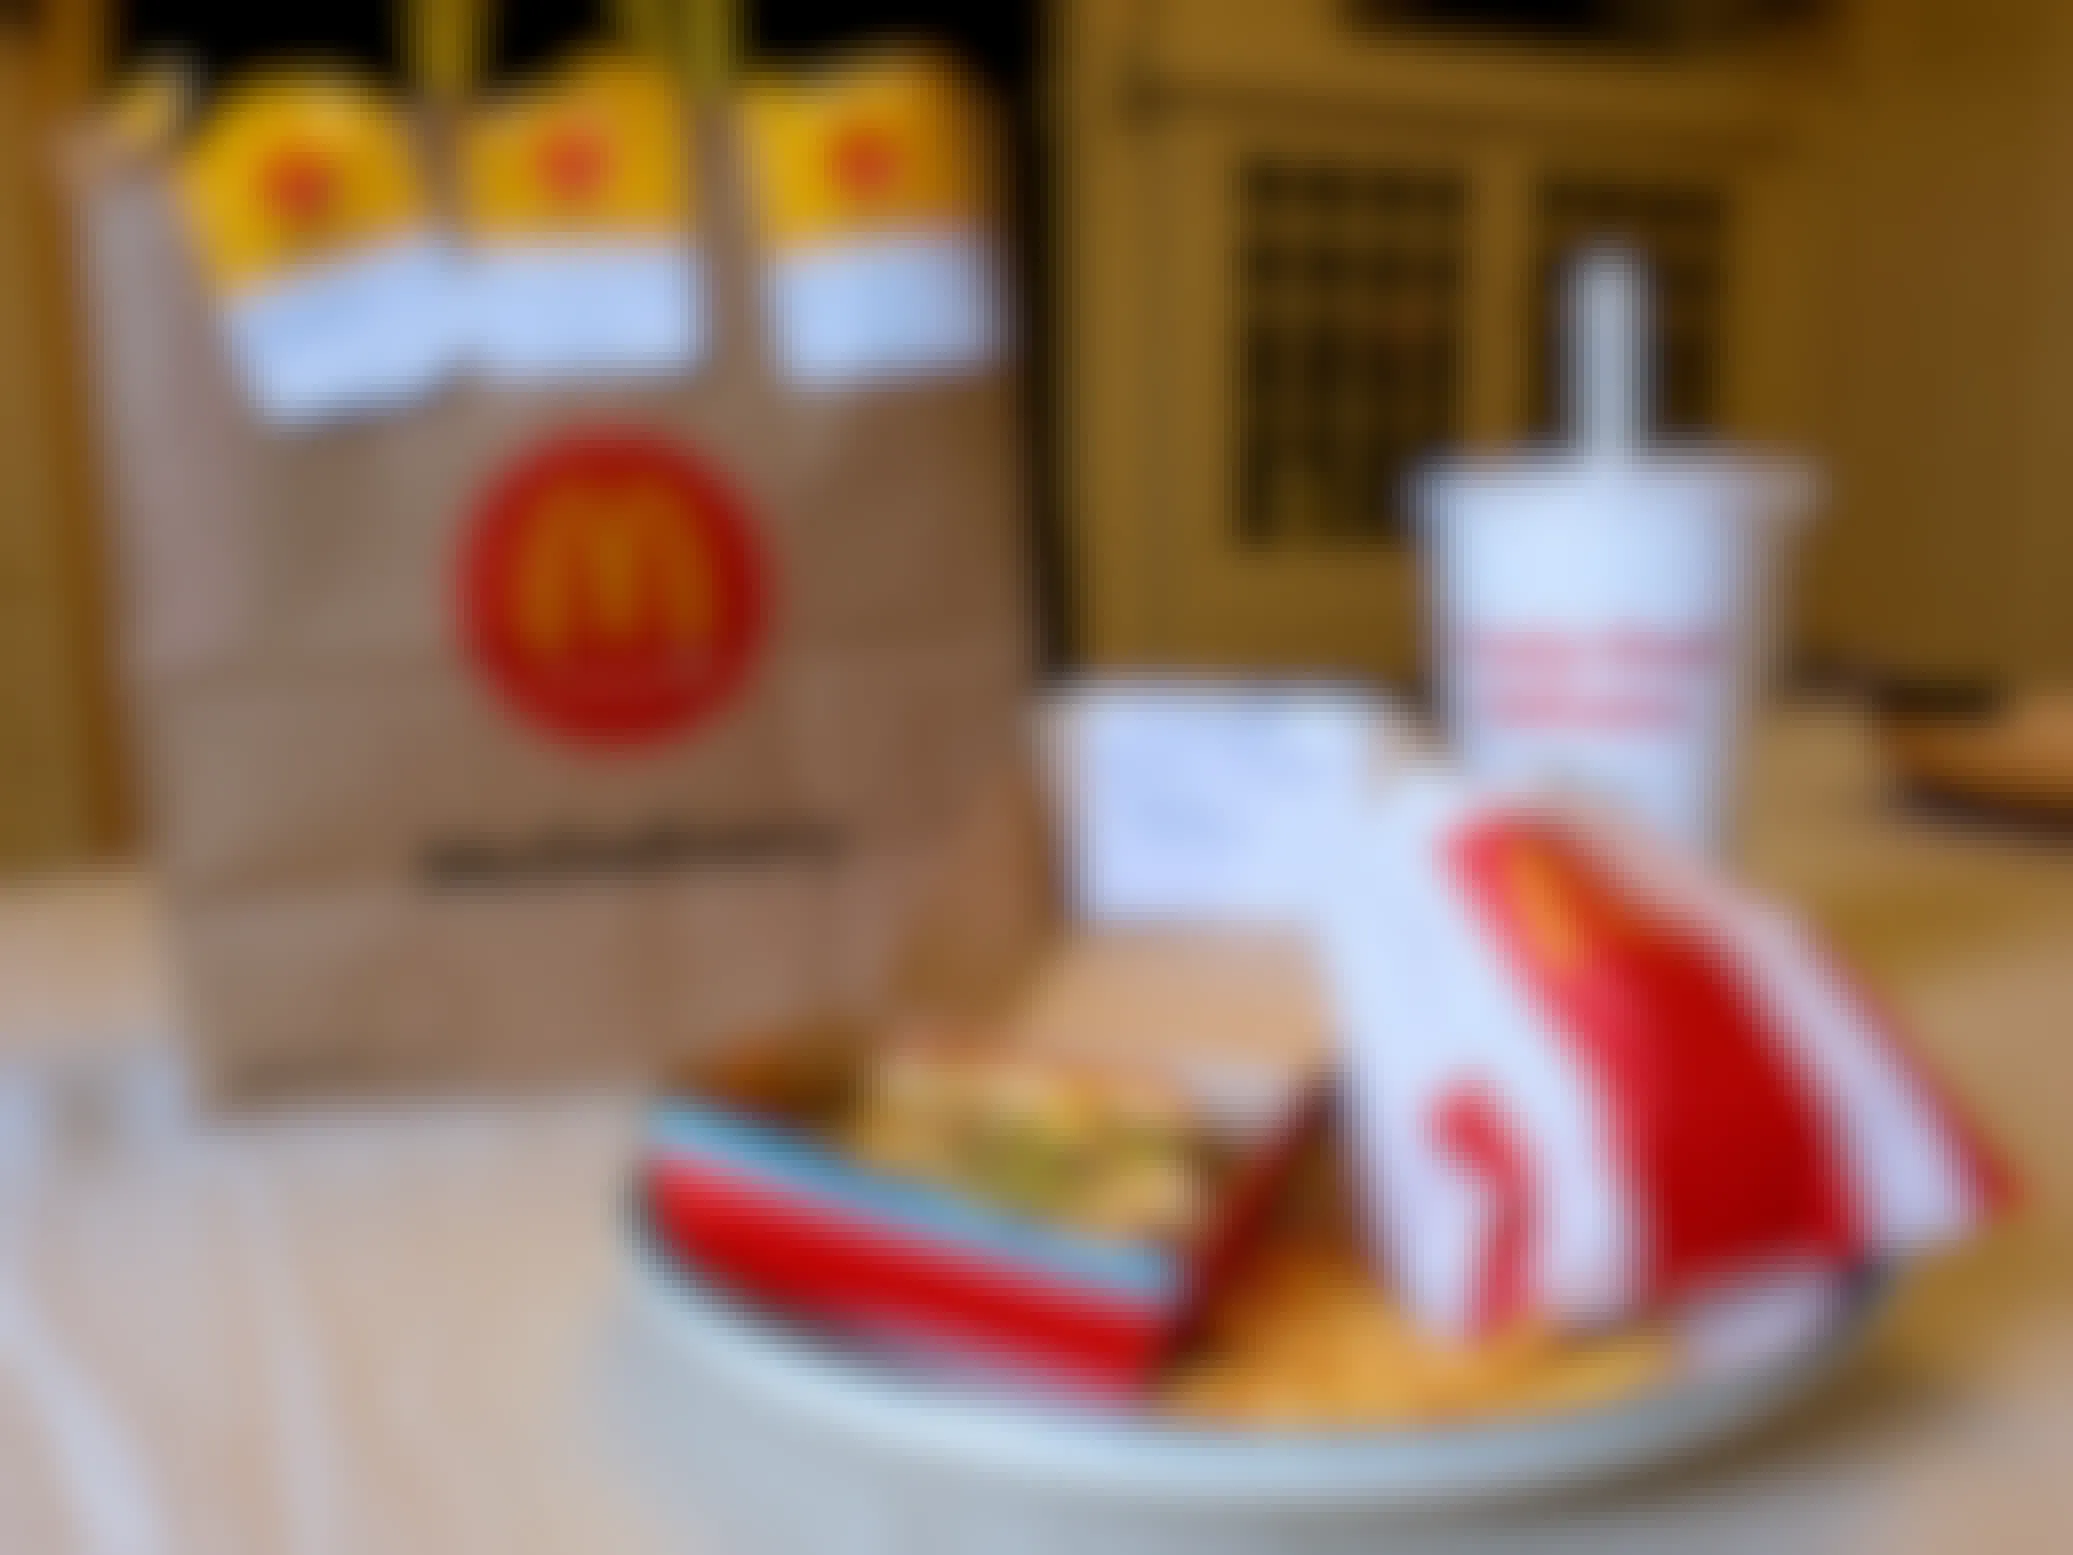 A Big Mac meal with fries and a drink sitting on a table next to a McDonald's McDelivery bag from Uber Eats.